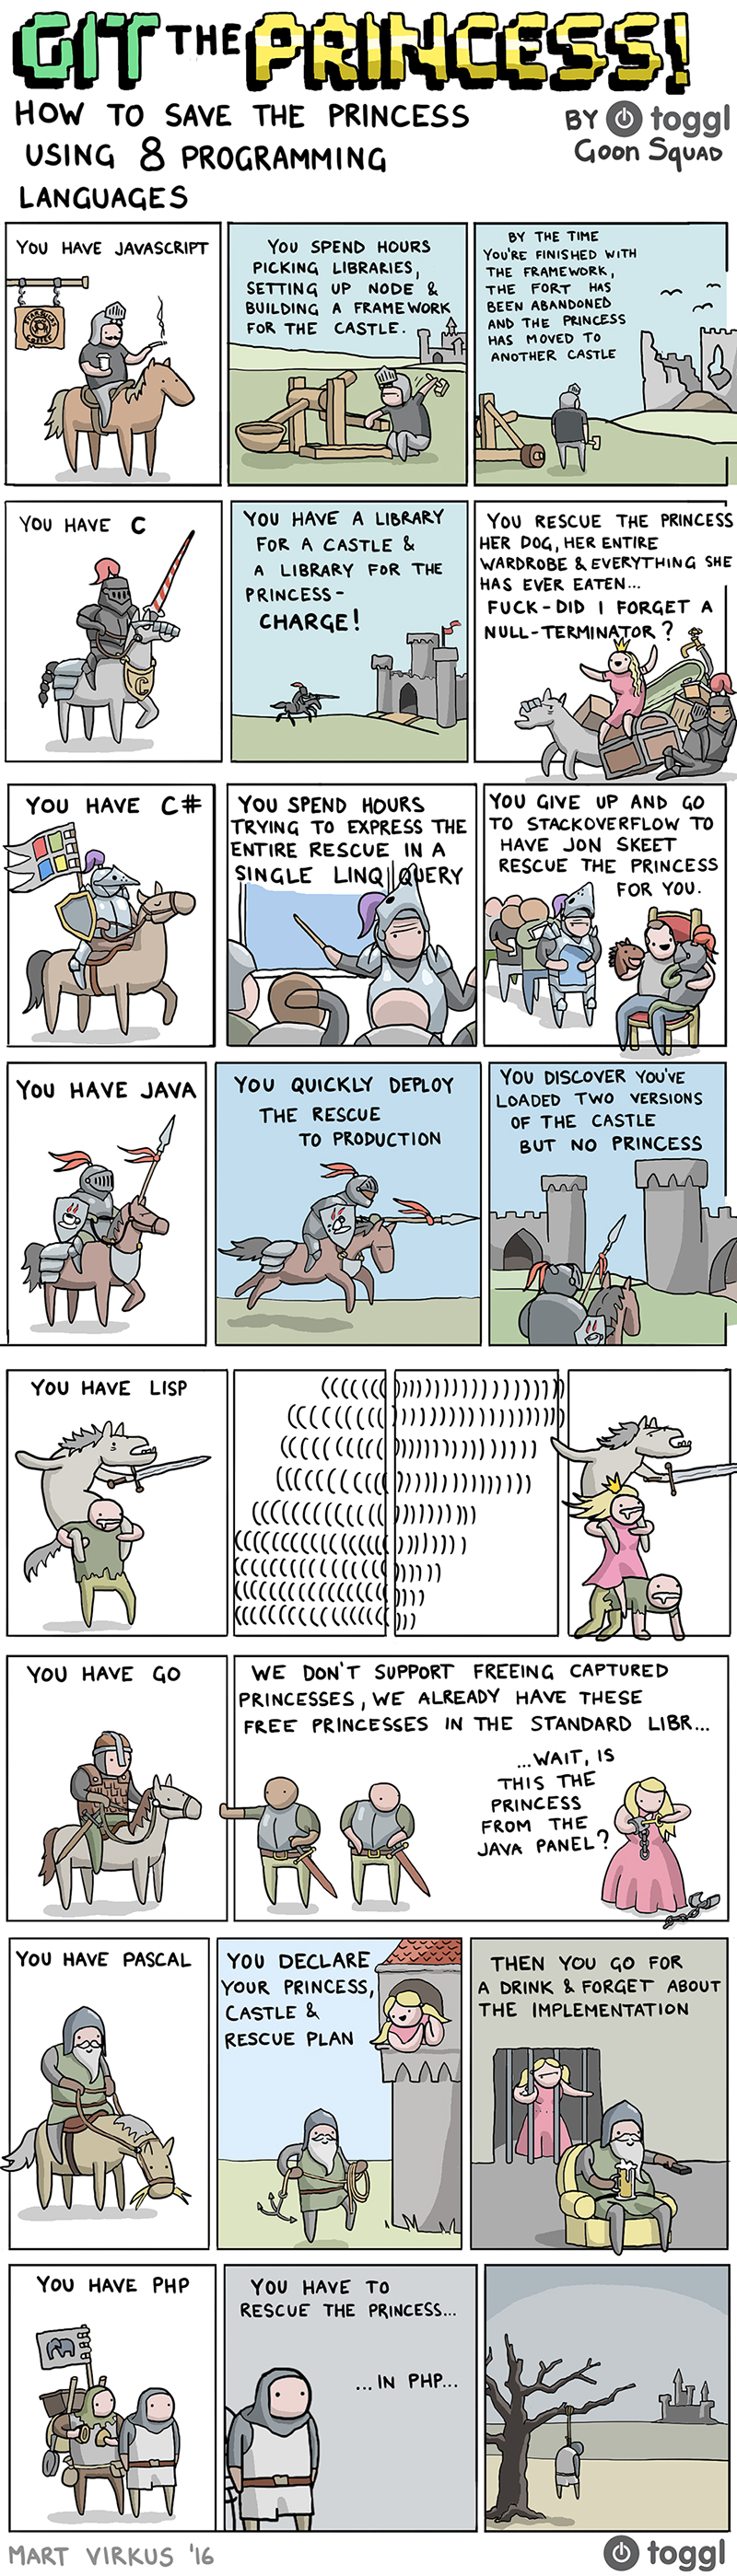 Nom : toggl-how-to-save-the-princess-in-8-programming-languages.jpg
Affichages : 496
Taille : 1,15 Mo